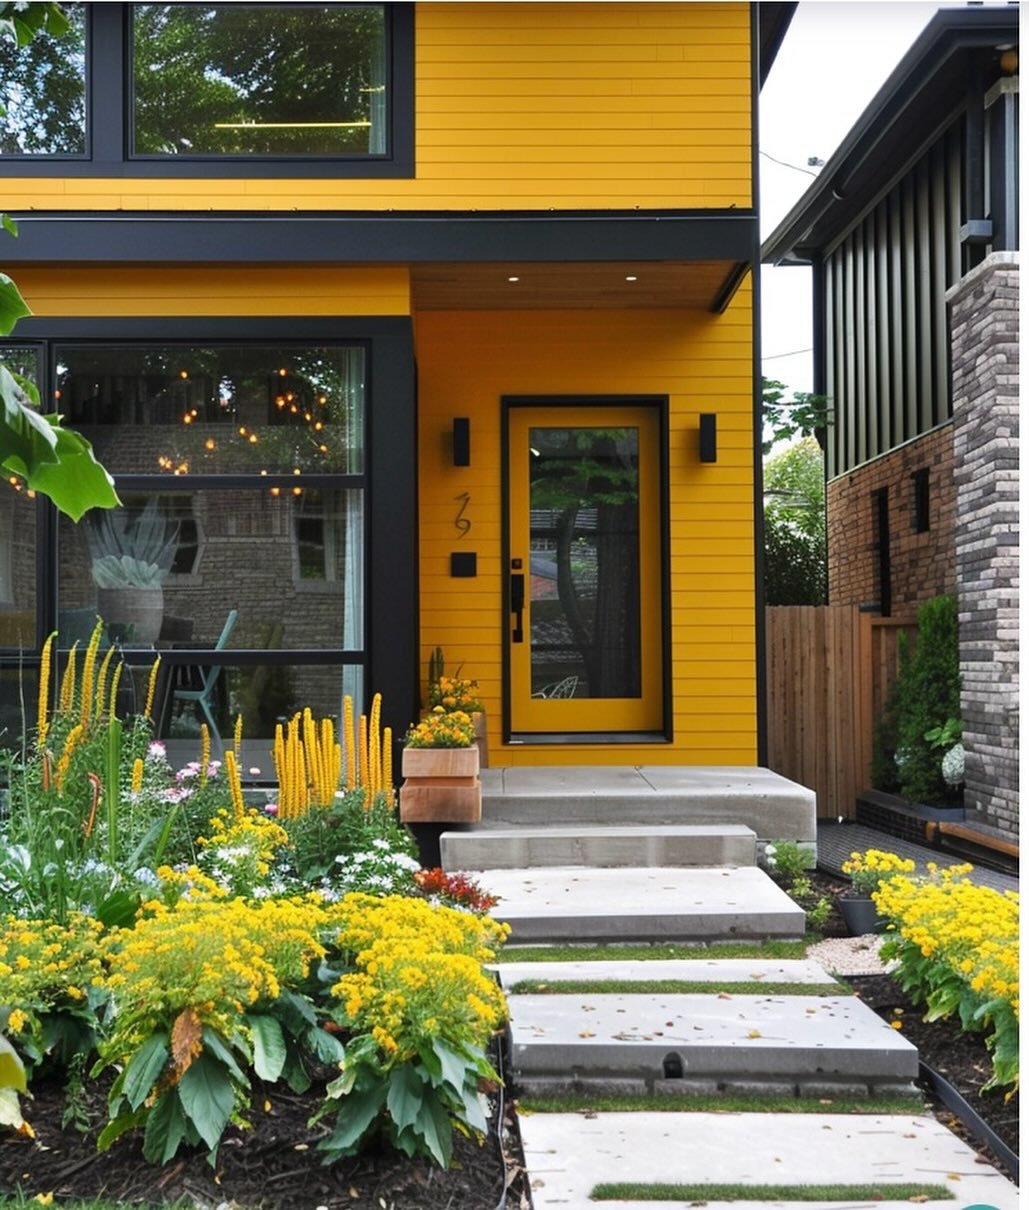 Check out this bold and colorful home! Color is not for everyone but wow, it really makes a statement. The landscaping really makes the curb appeal fabulous too! @diybunker_ #interiordesign #exteriordesign #colorfulexteriorhomes #modernhomes #landsca